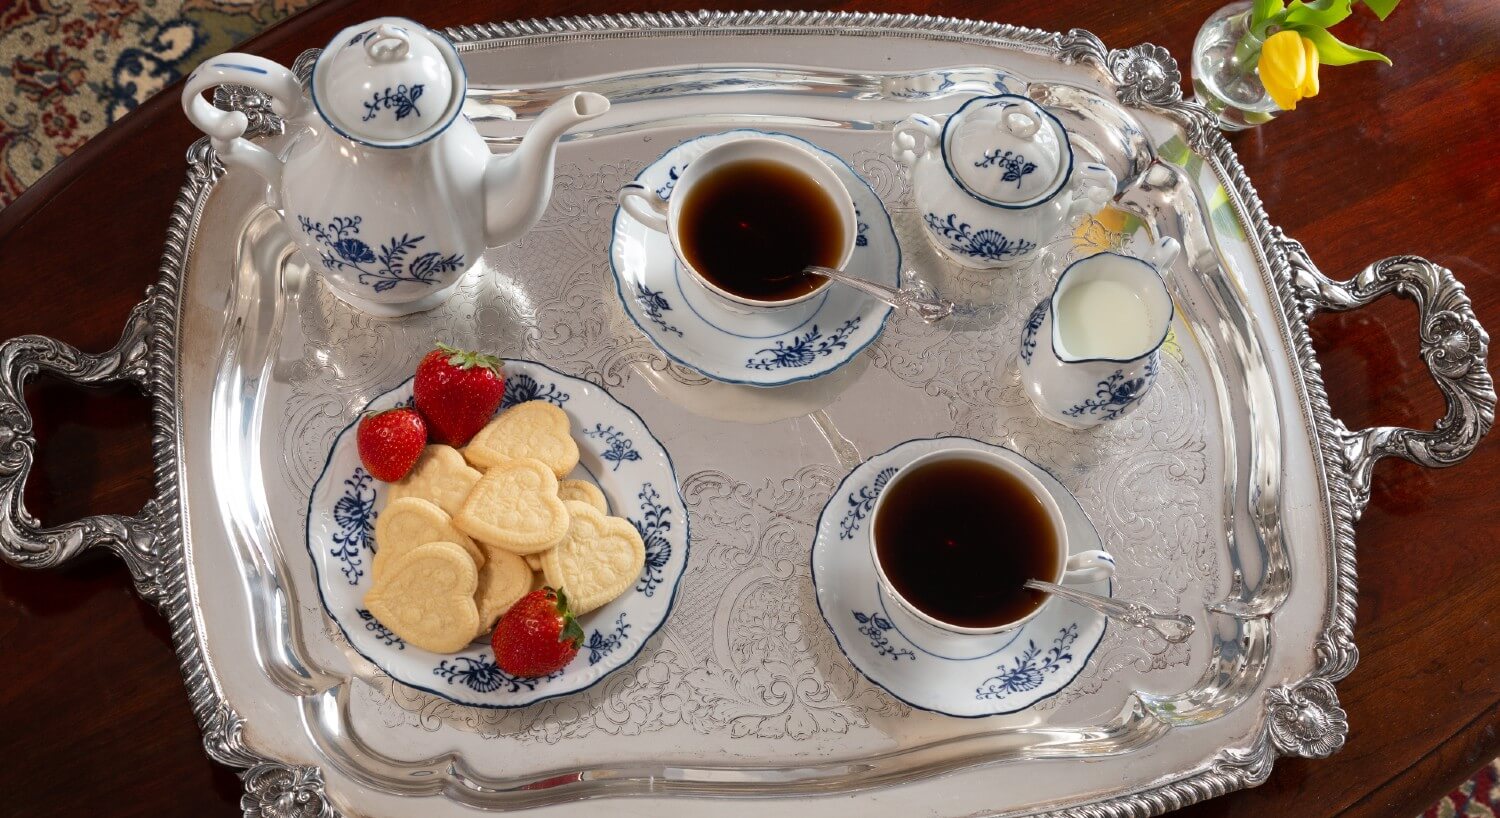 Beautiful silver platter holding white and blue dishes of a plate of cookies, two tea cups and pitcher of tea